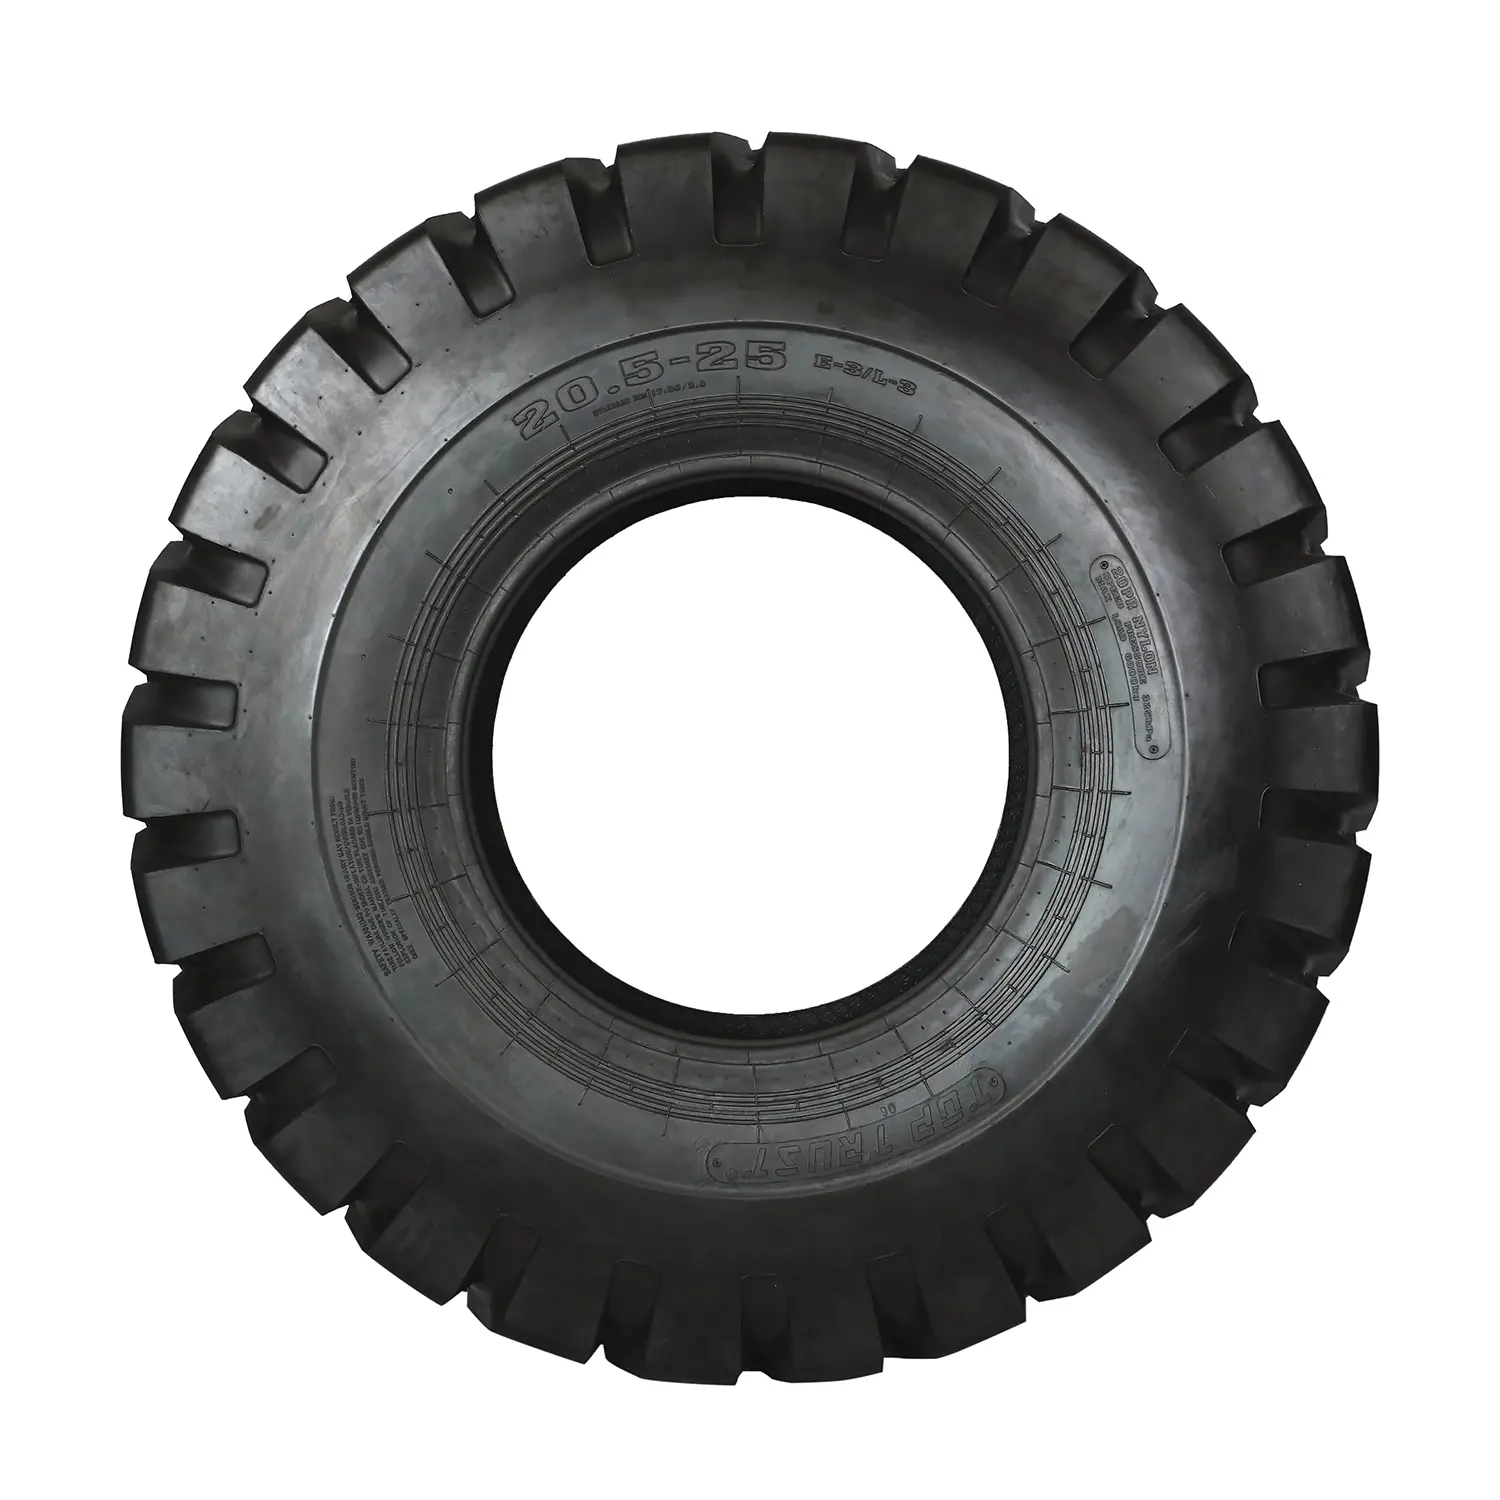 E-3/L-3 Top Trust, All Win OTR Tyre in Various Mines and Construction Sites with 14/90-16-12